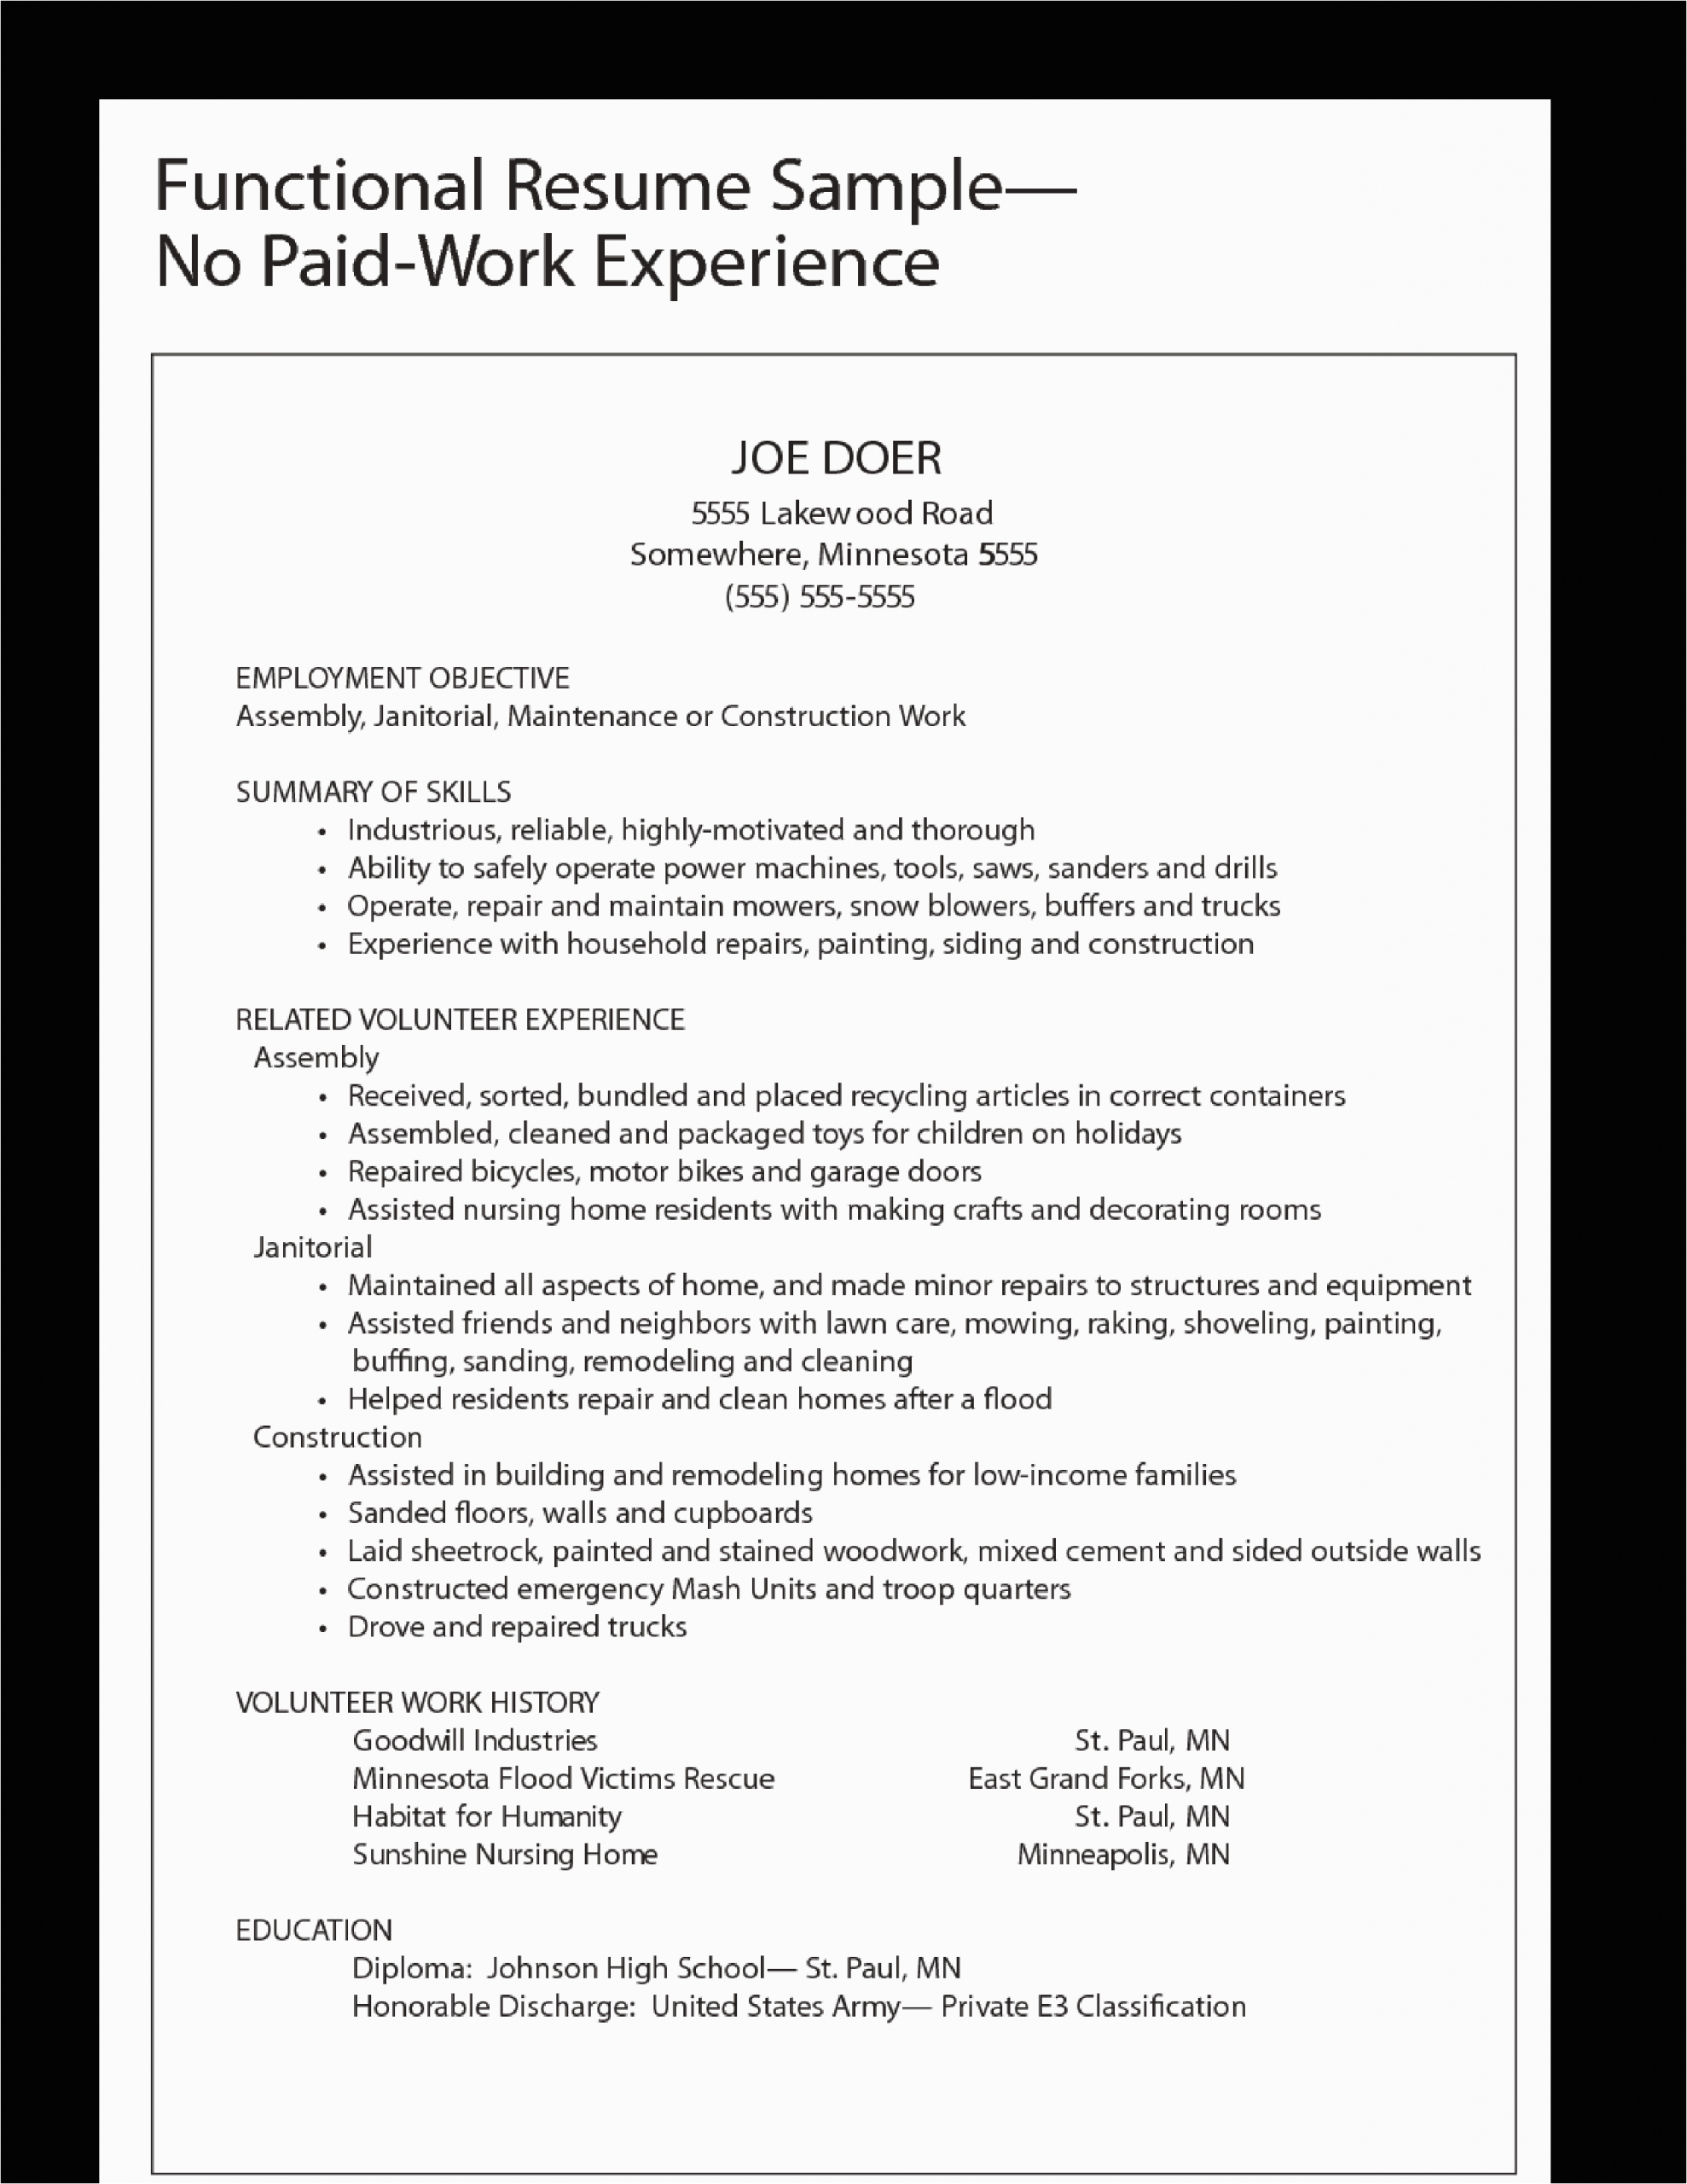 Resume Template for Lots Of Experience Functional Work Experience Resume Sample